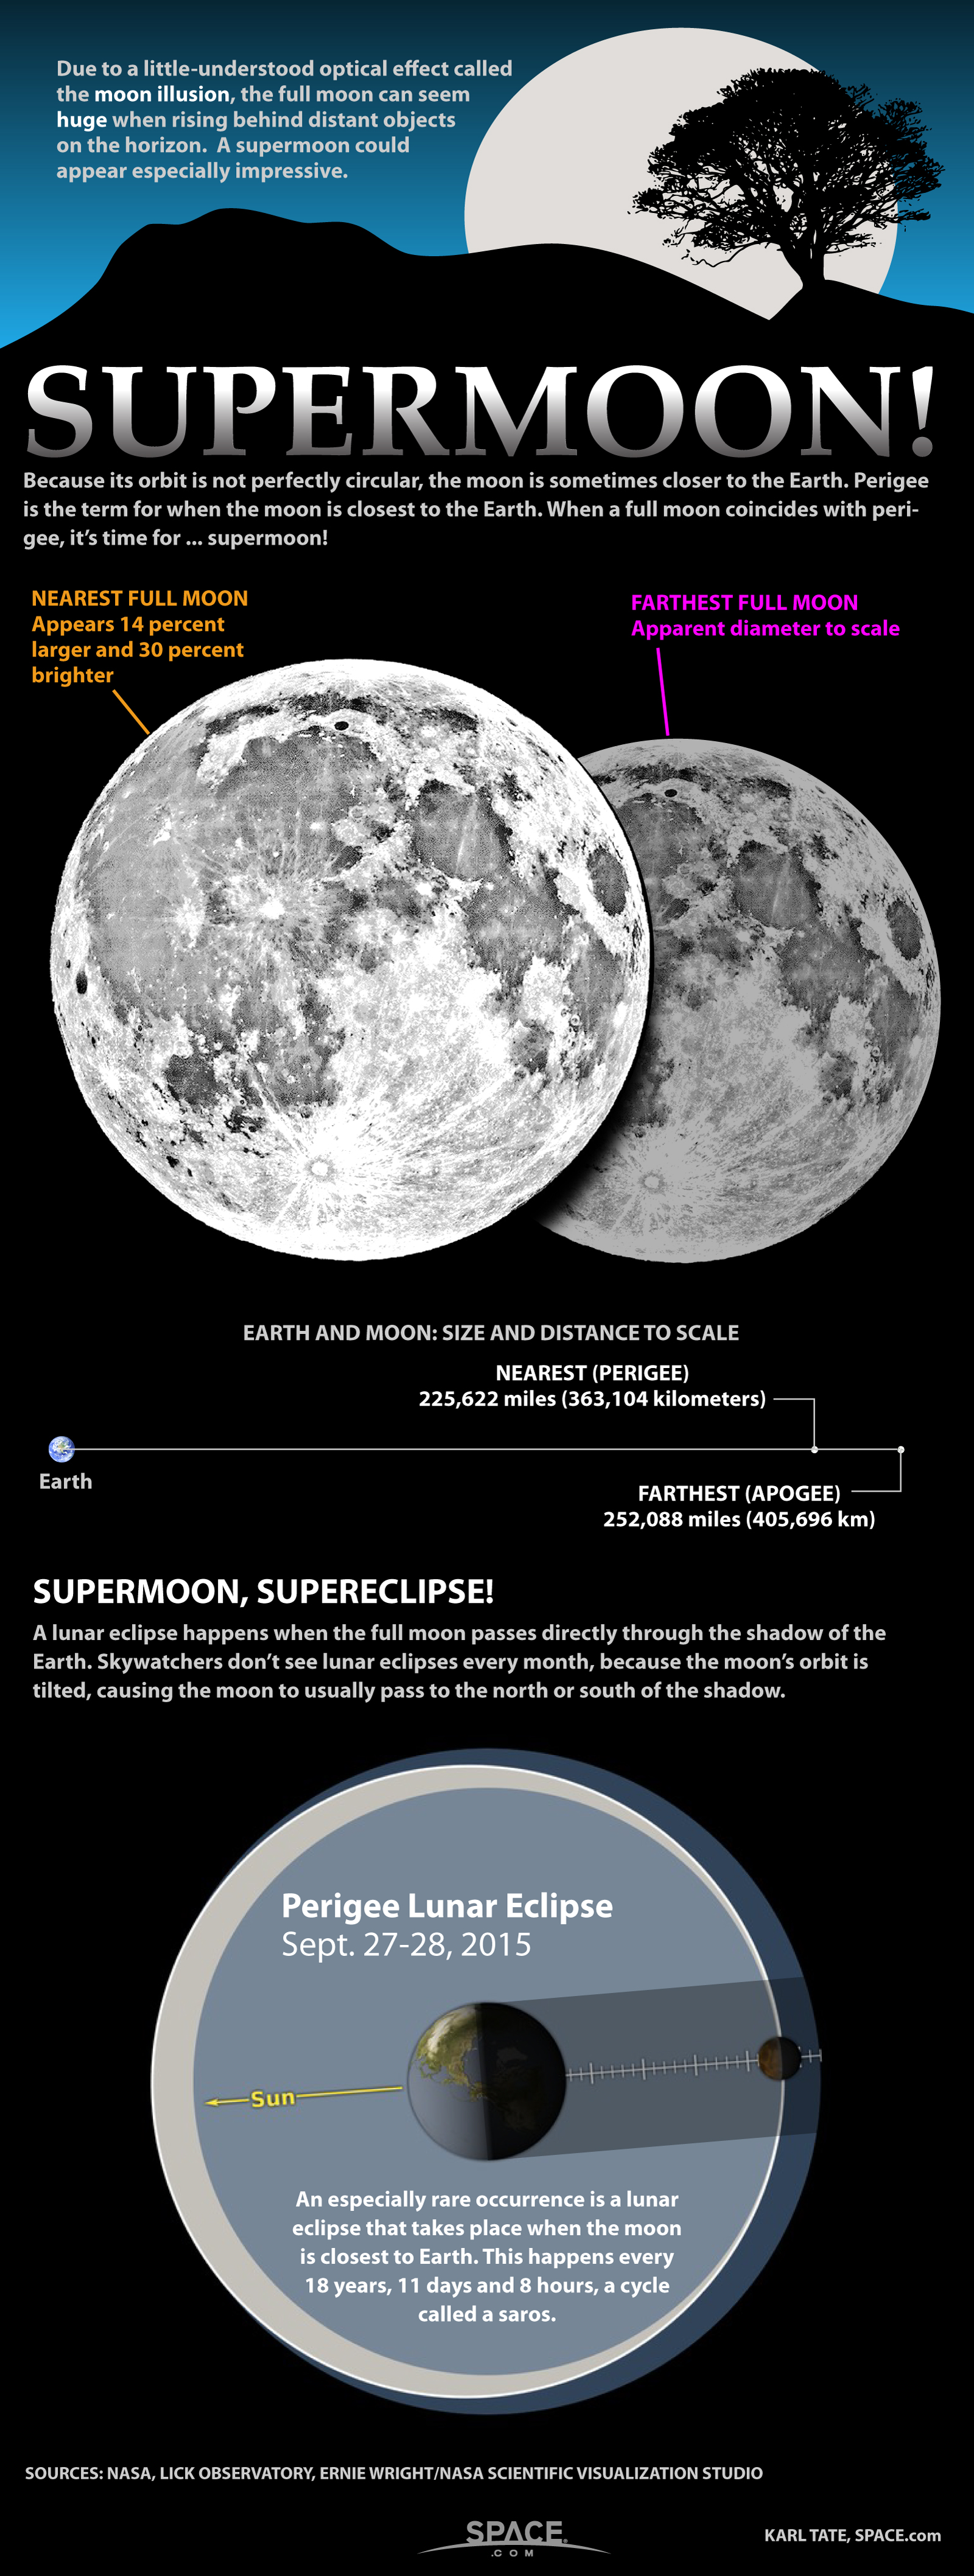 Supermoons can appear 30 percent brighter and up to 14 percent larger than typical full moons. Learn what makes a big full moon a true 'supermoon' in this Space.com infographic.